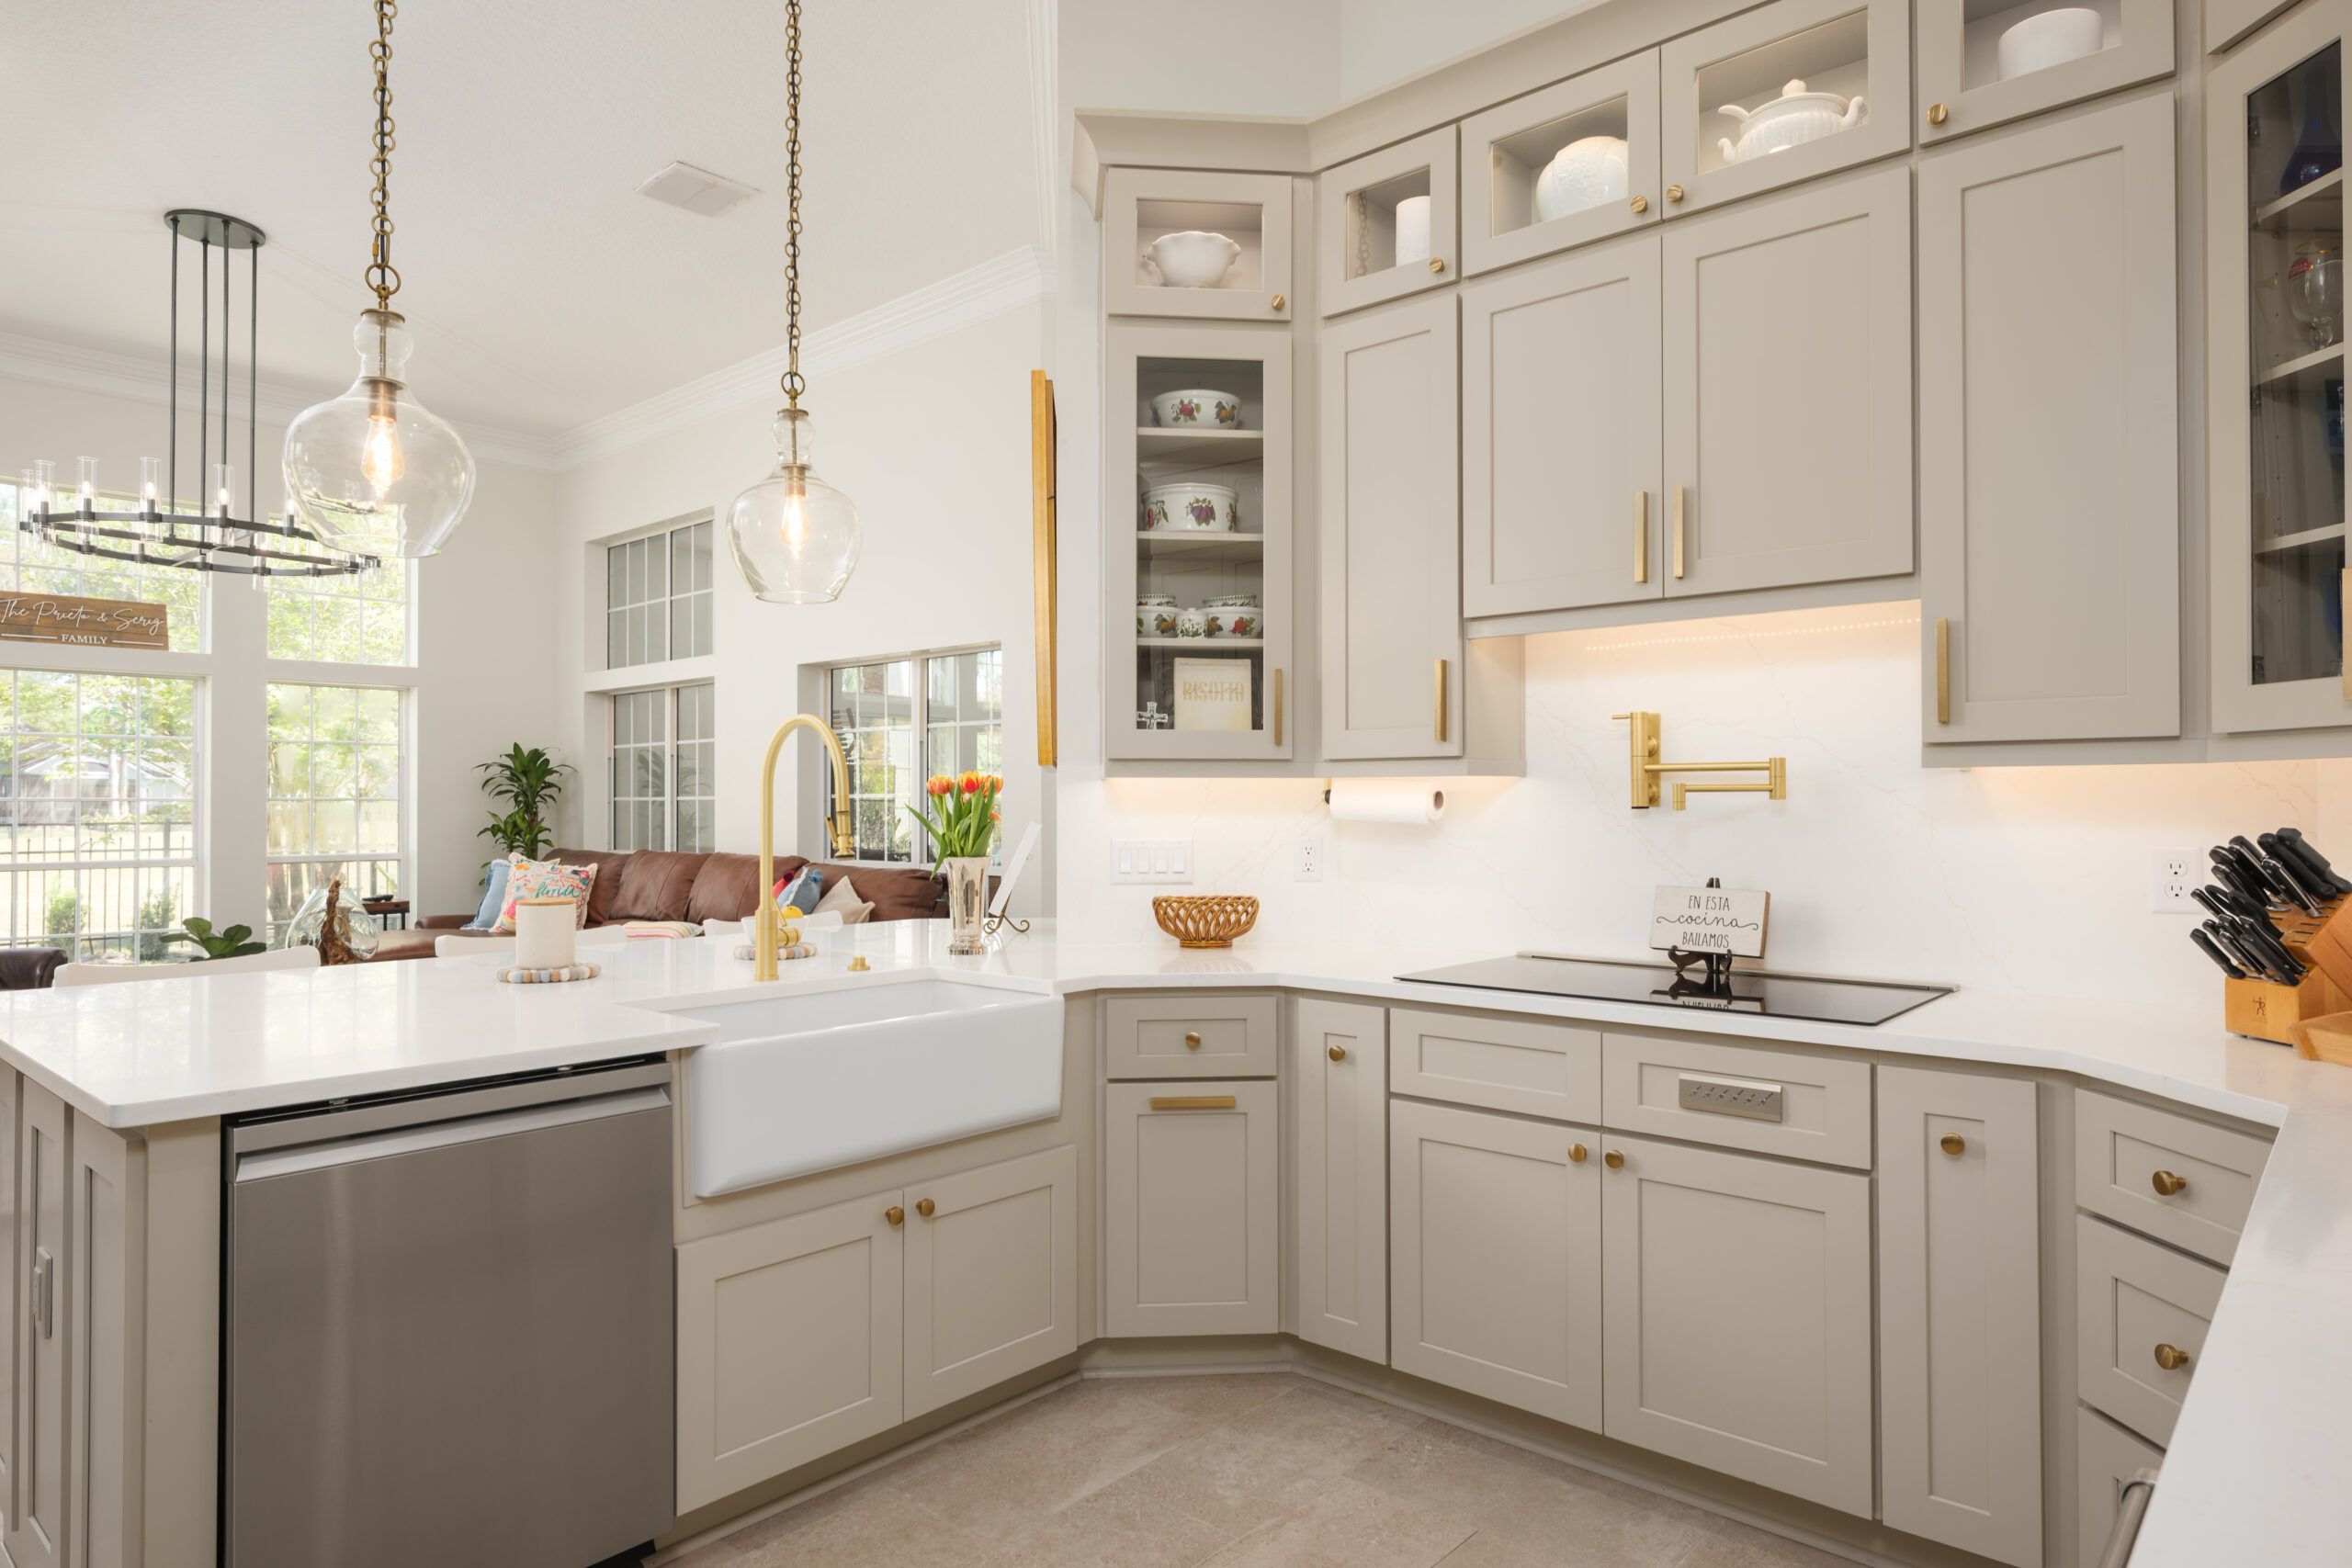 Kitchen remodel with sand colored cabinets, gold fixtures, and a white barn house sink